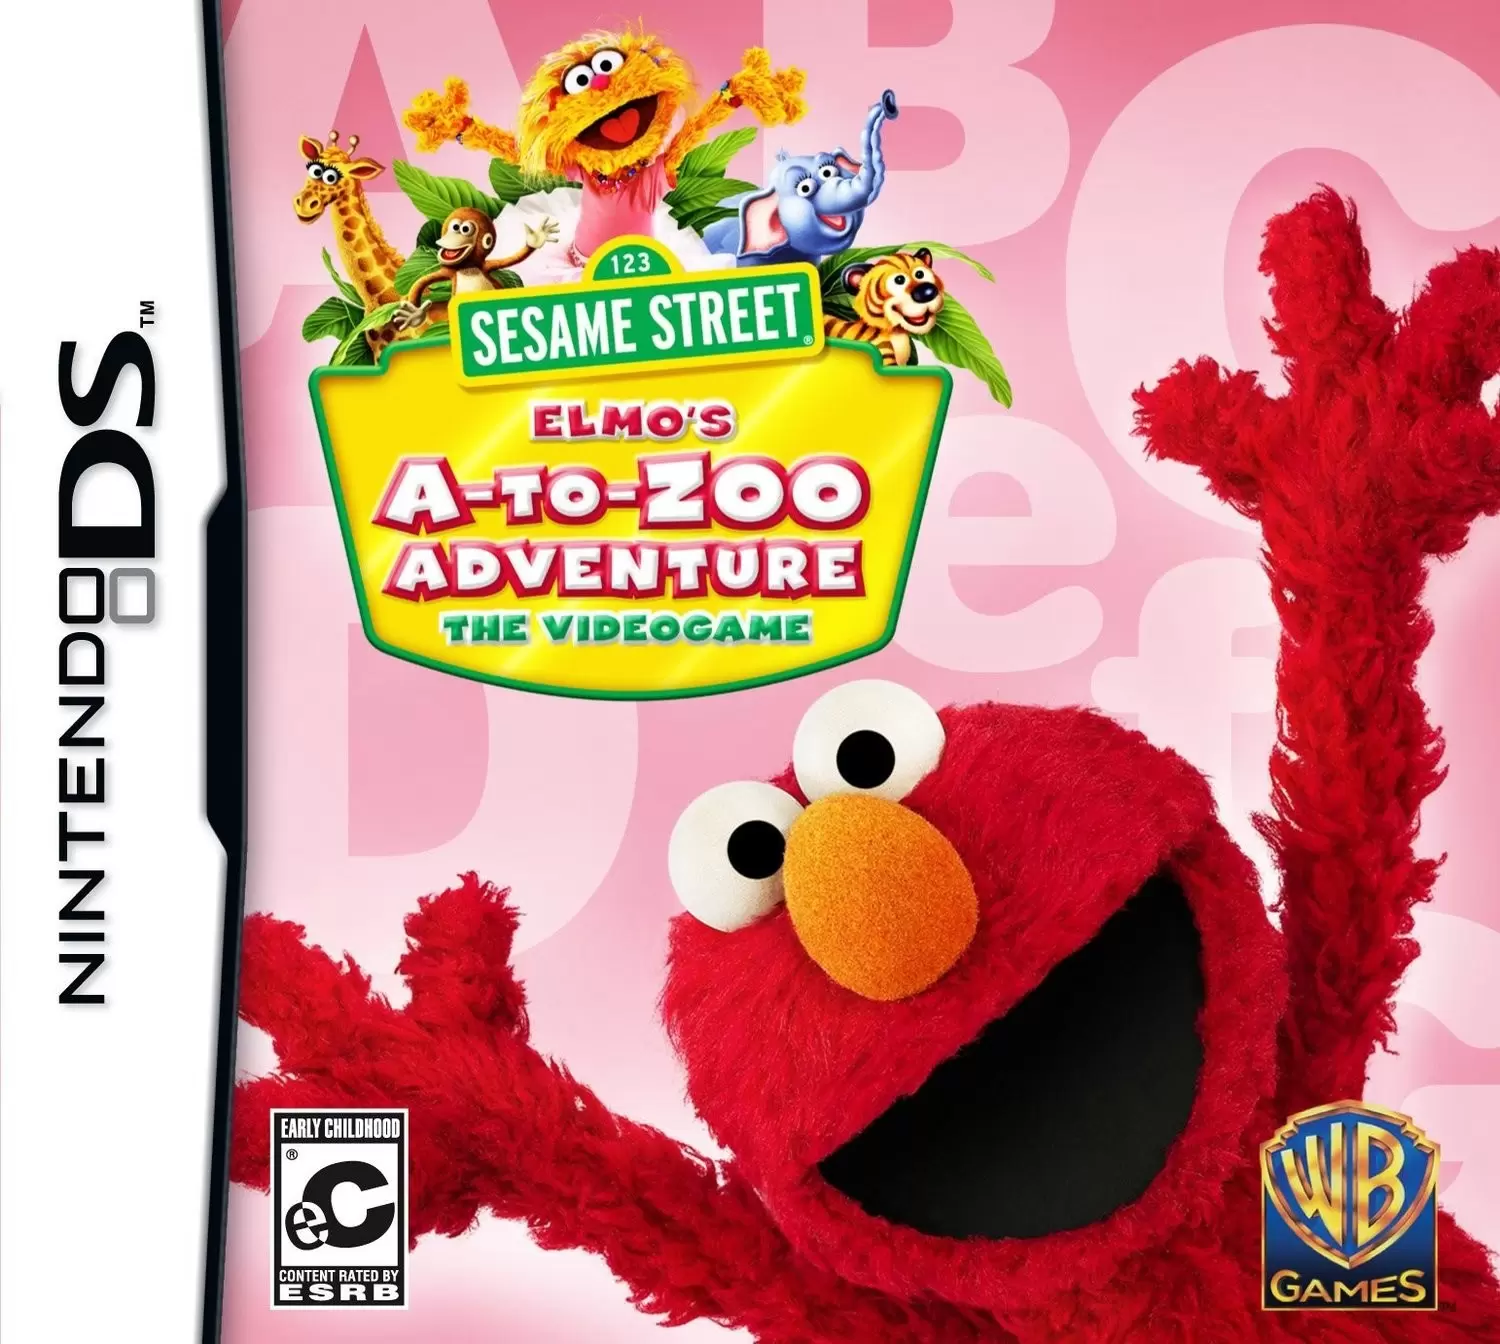 Jeux Nintendo DS - Sesame Street Elmo\'s A-to-Zoo Adventure the Videogame